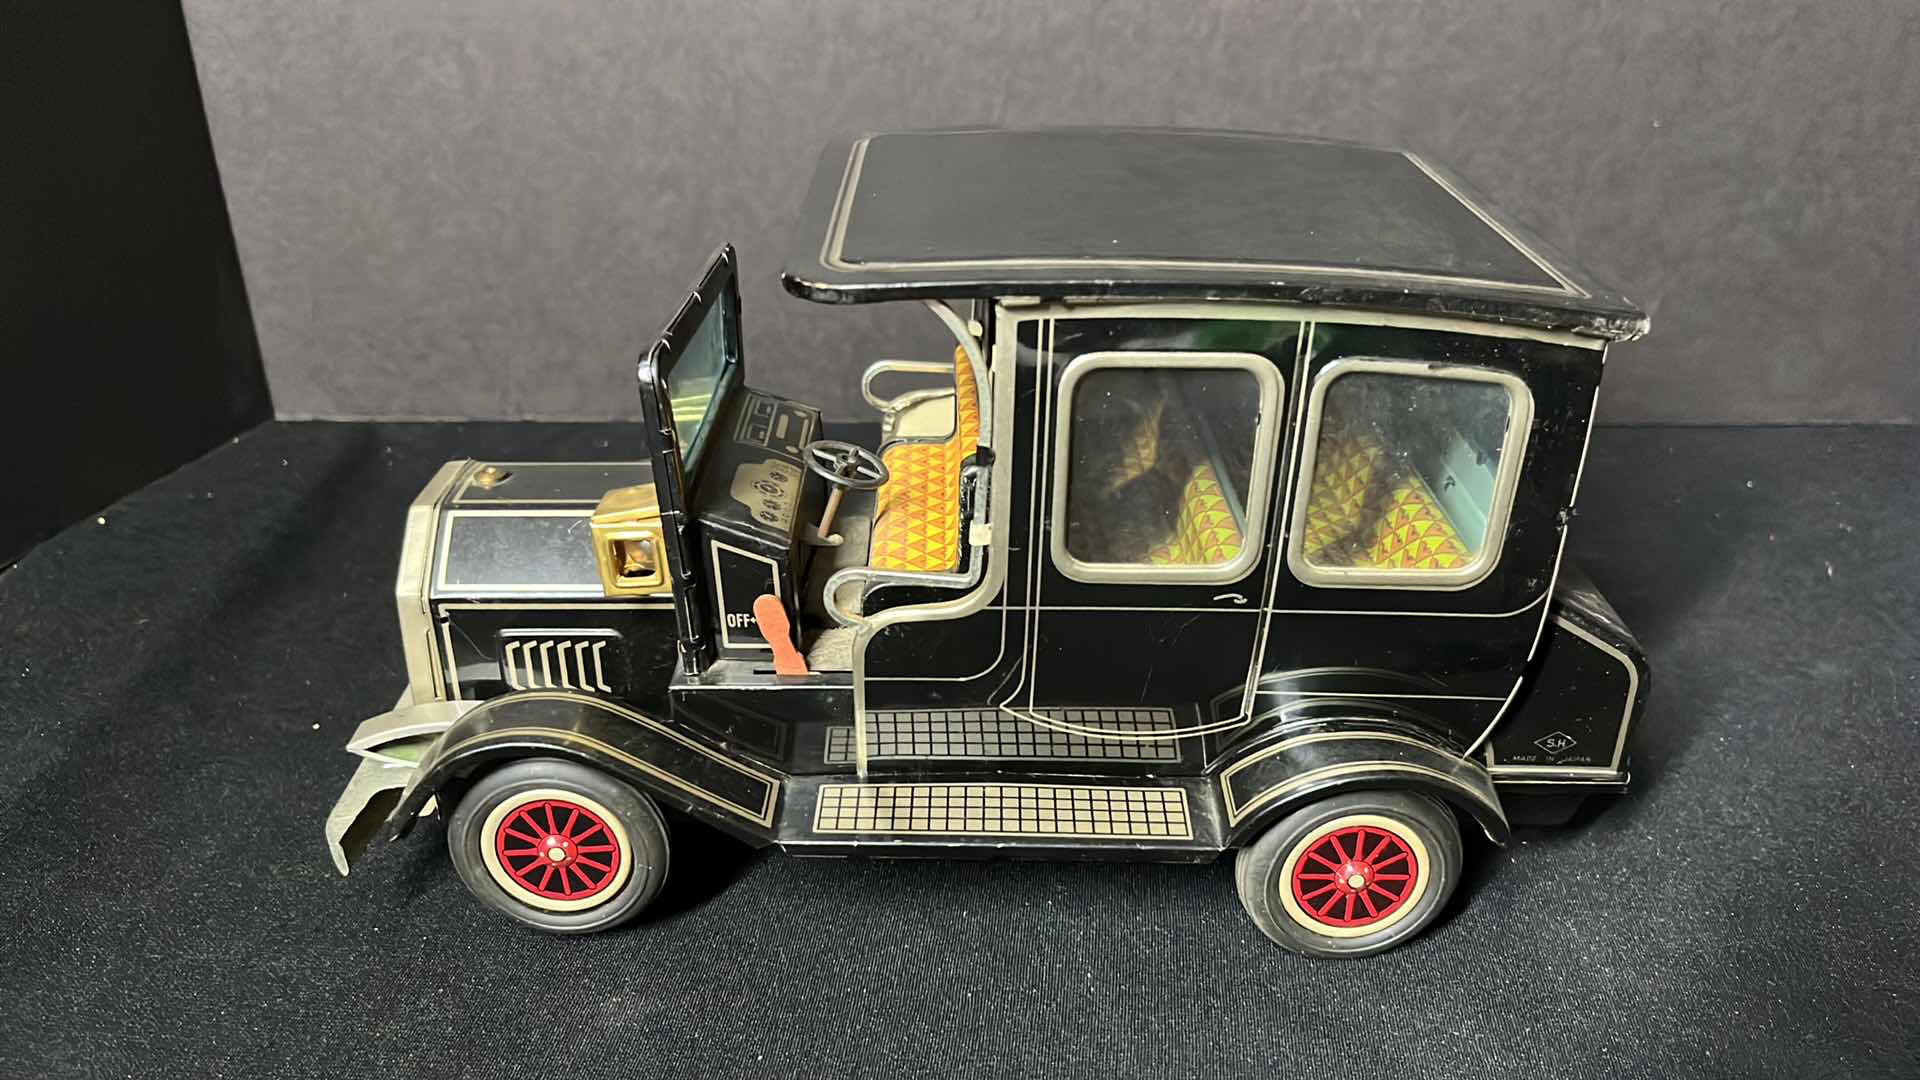 Photo 2 of S.H. HORIKAWA OLD TIMER CAR BATTERY OPERATED ACTION TOY